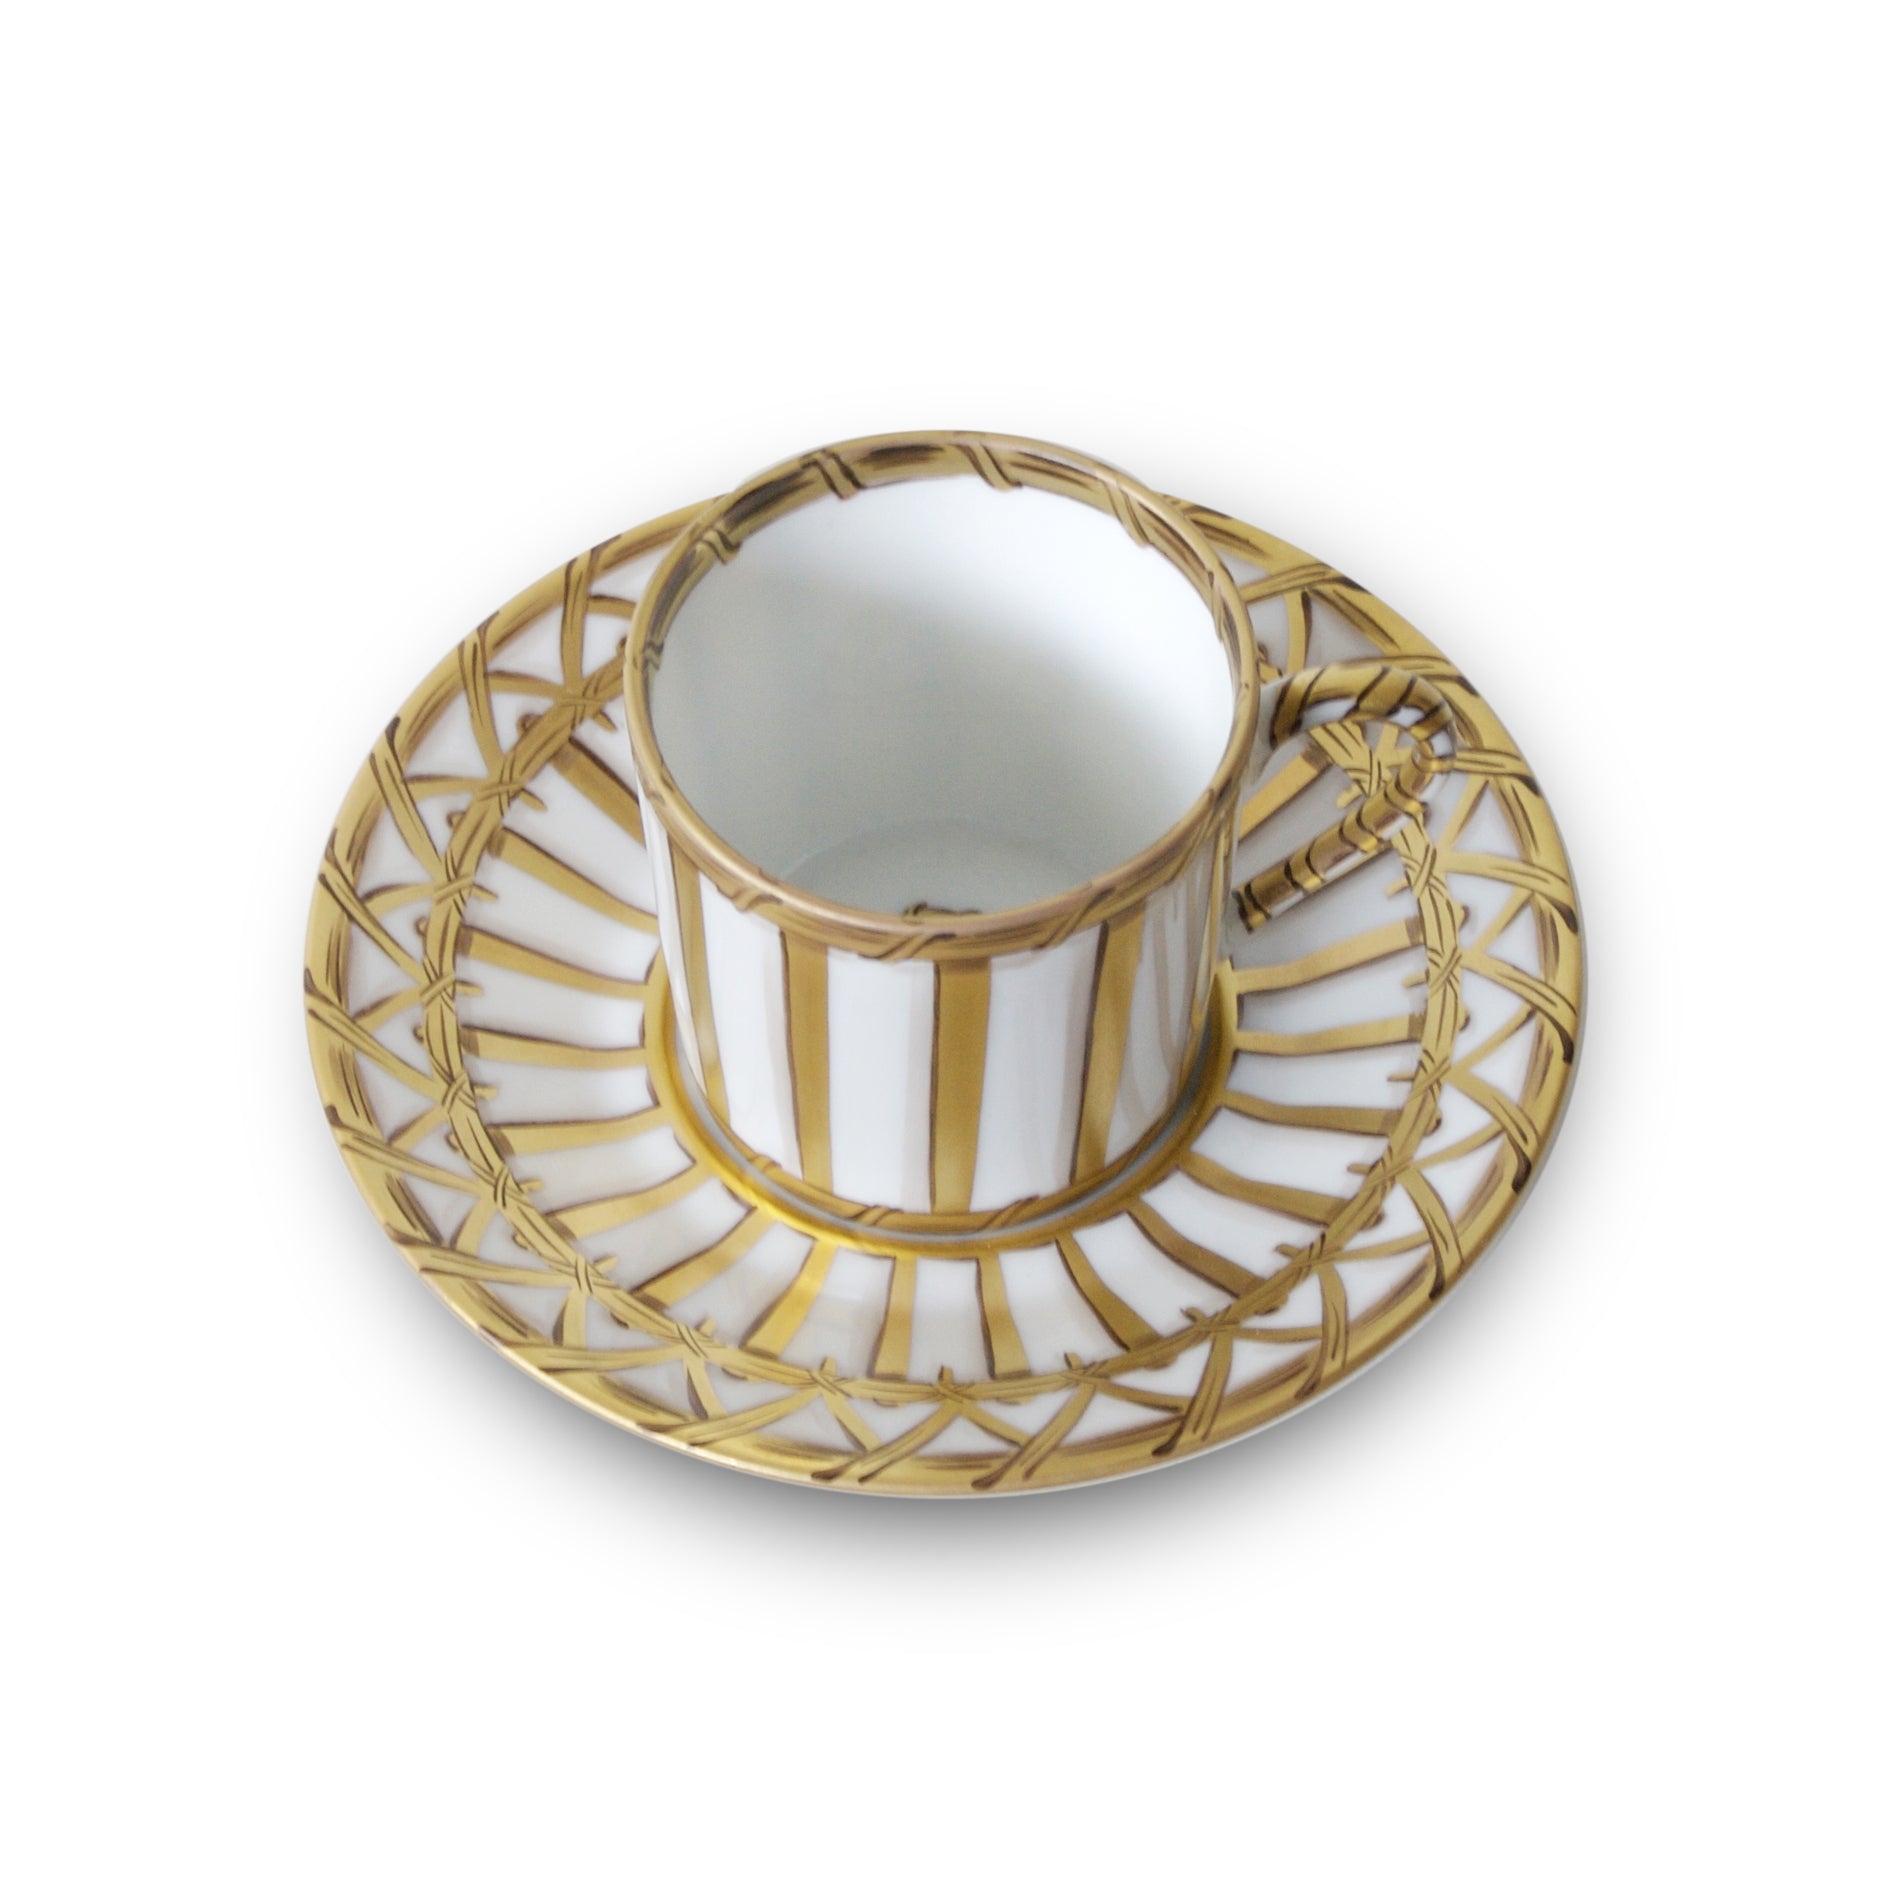 Vannerie - Coffee cup and saucer
